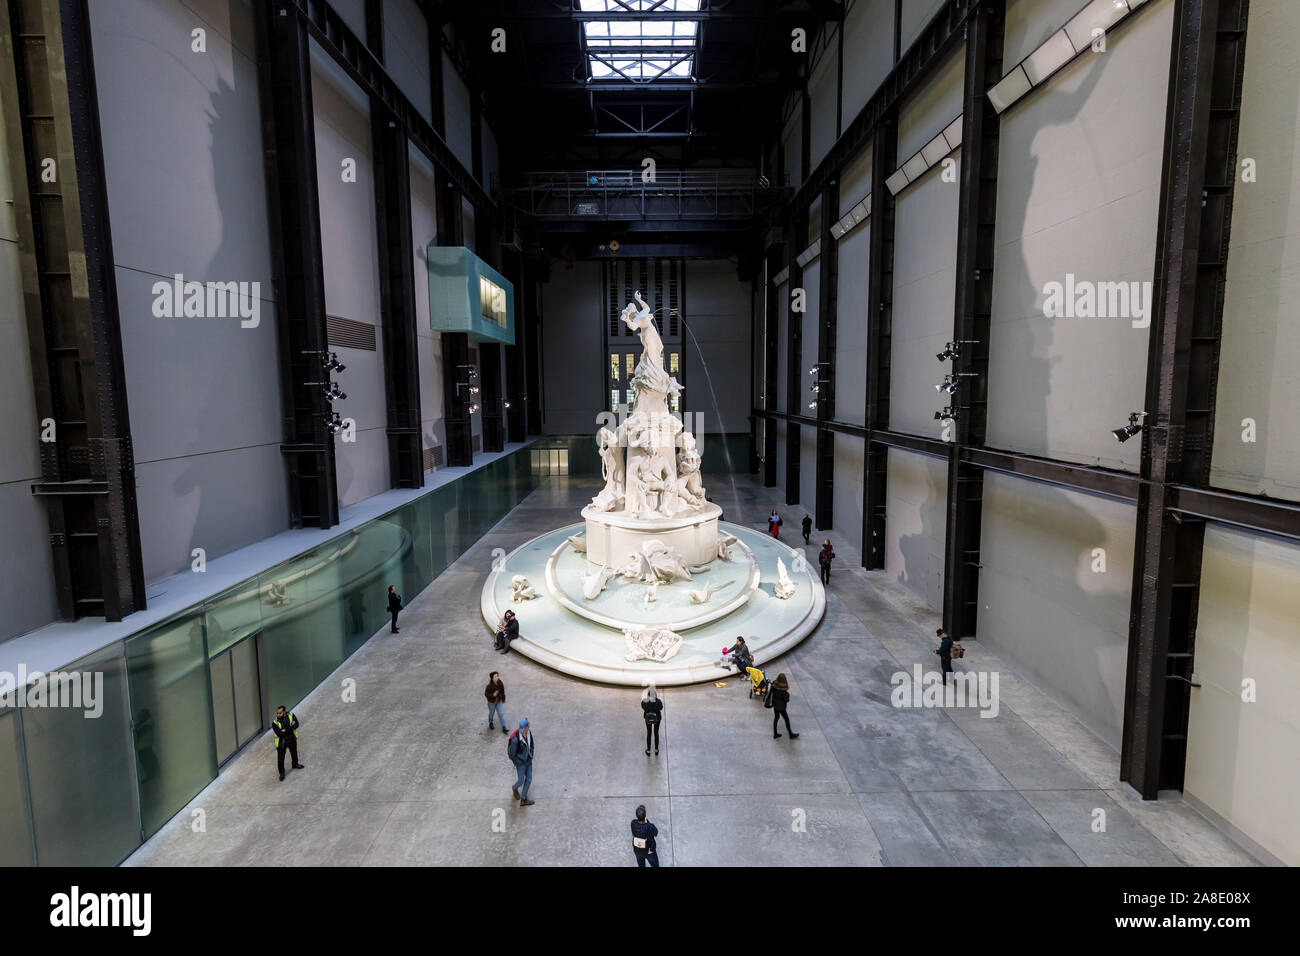 LONDON - NOV 6, 2019: Interior of Tate Modern in London with water fountain sculpture by Kara Walker Stock Photo